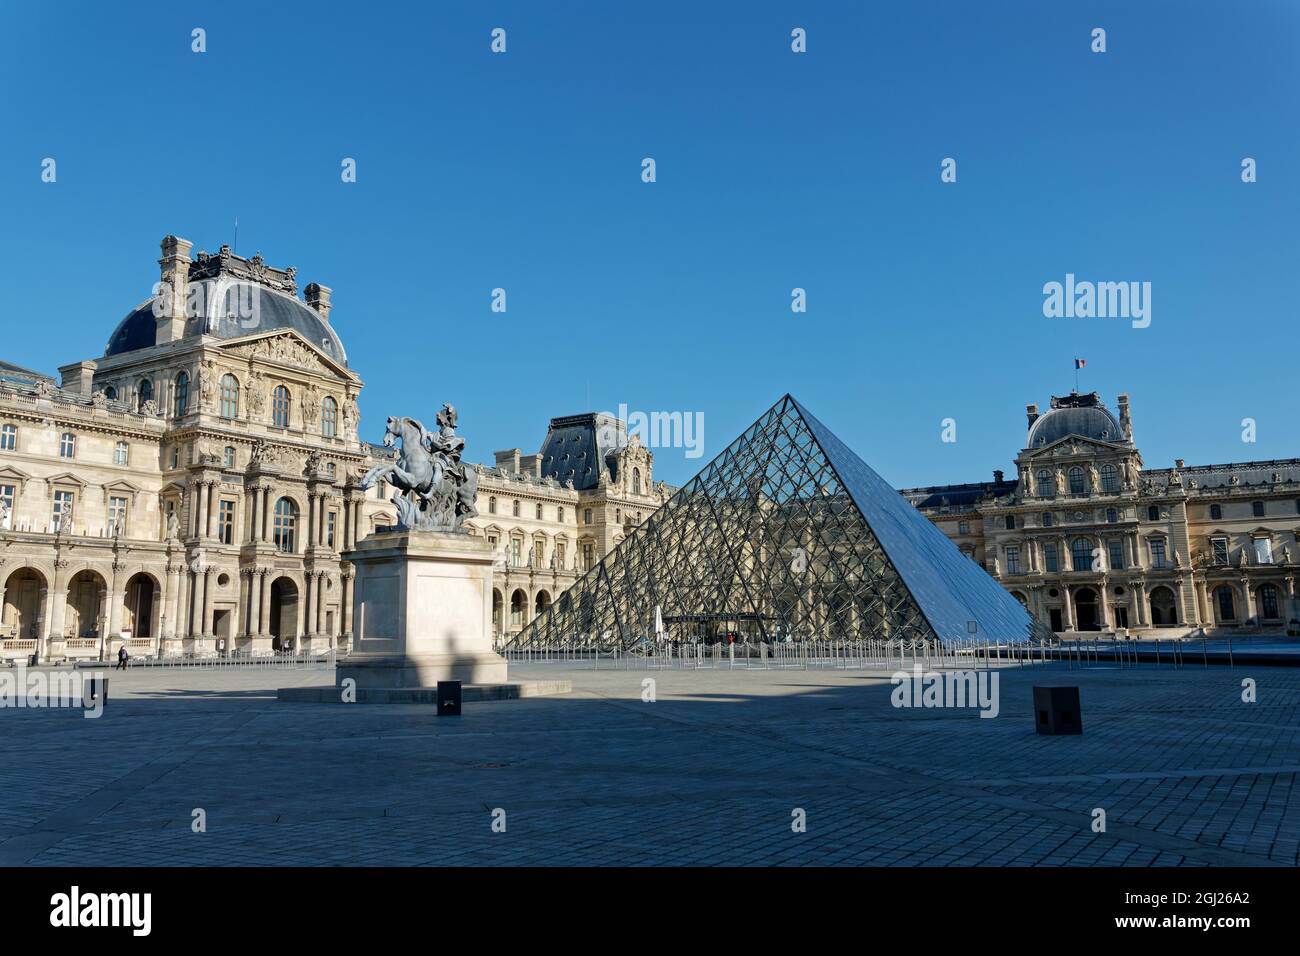 Louvre museum and the pyramid in Paris France Stock Photo